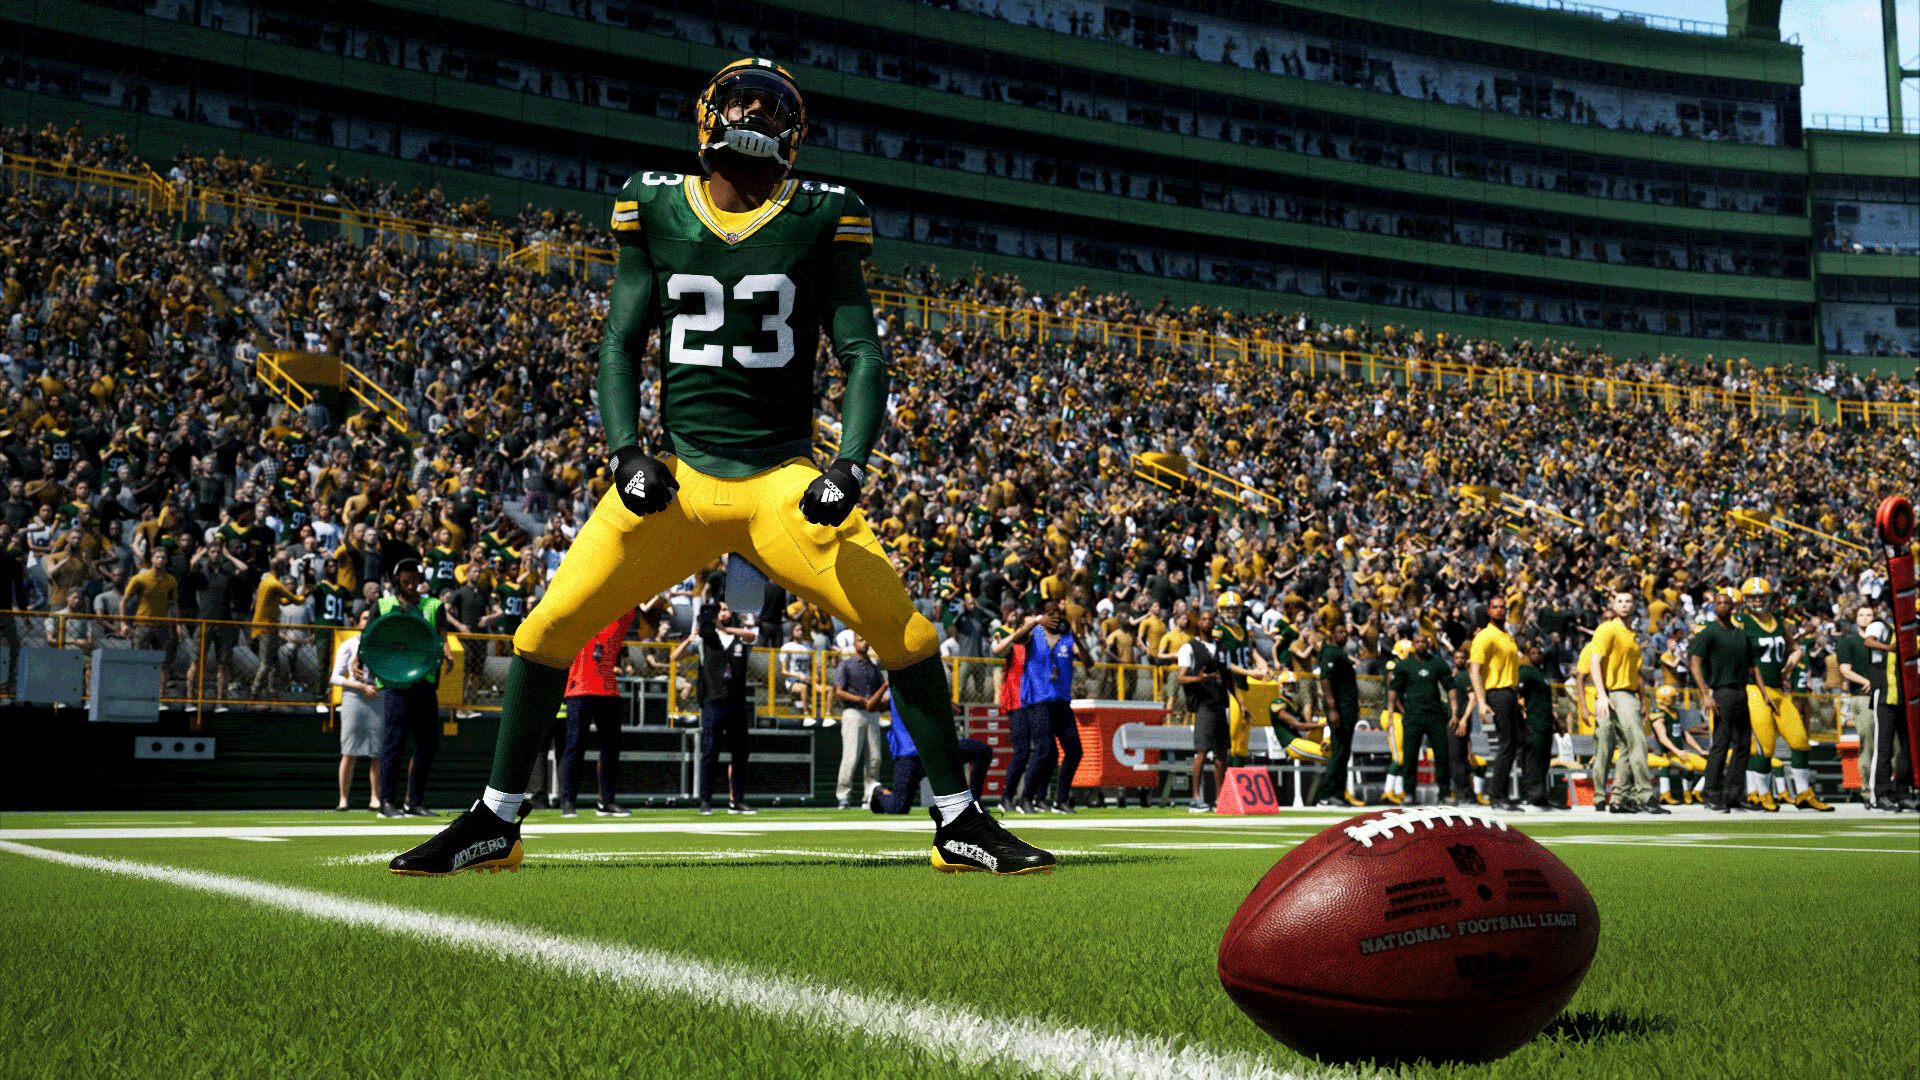 A Green Bay Packers defensive player celebrates a stop in the background while the football is seen in the foreground just inches from the goal line in a screenshot from Madden NFL 24